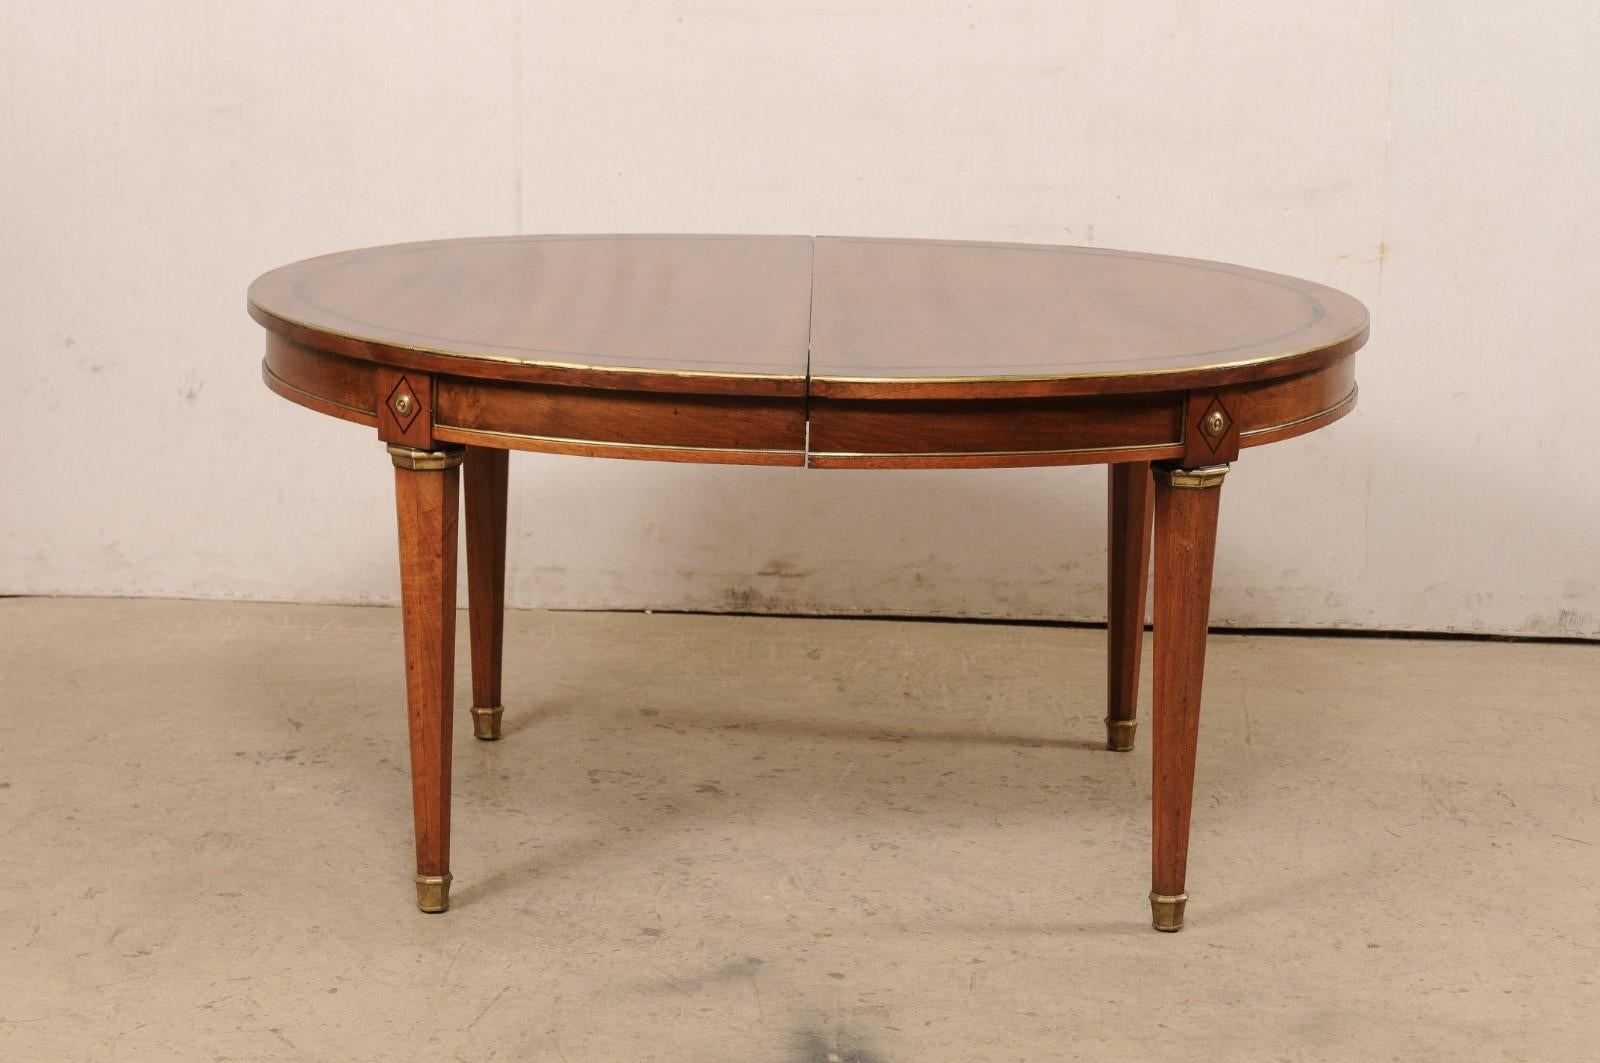 French Neoclassic Style Oval Table with Brass Trim & Accents '1 Leaf Extension' For Sale 5